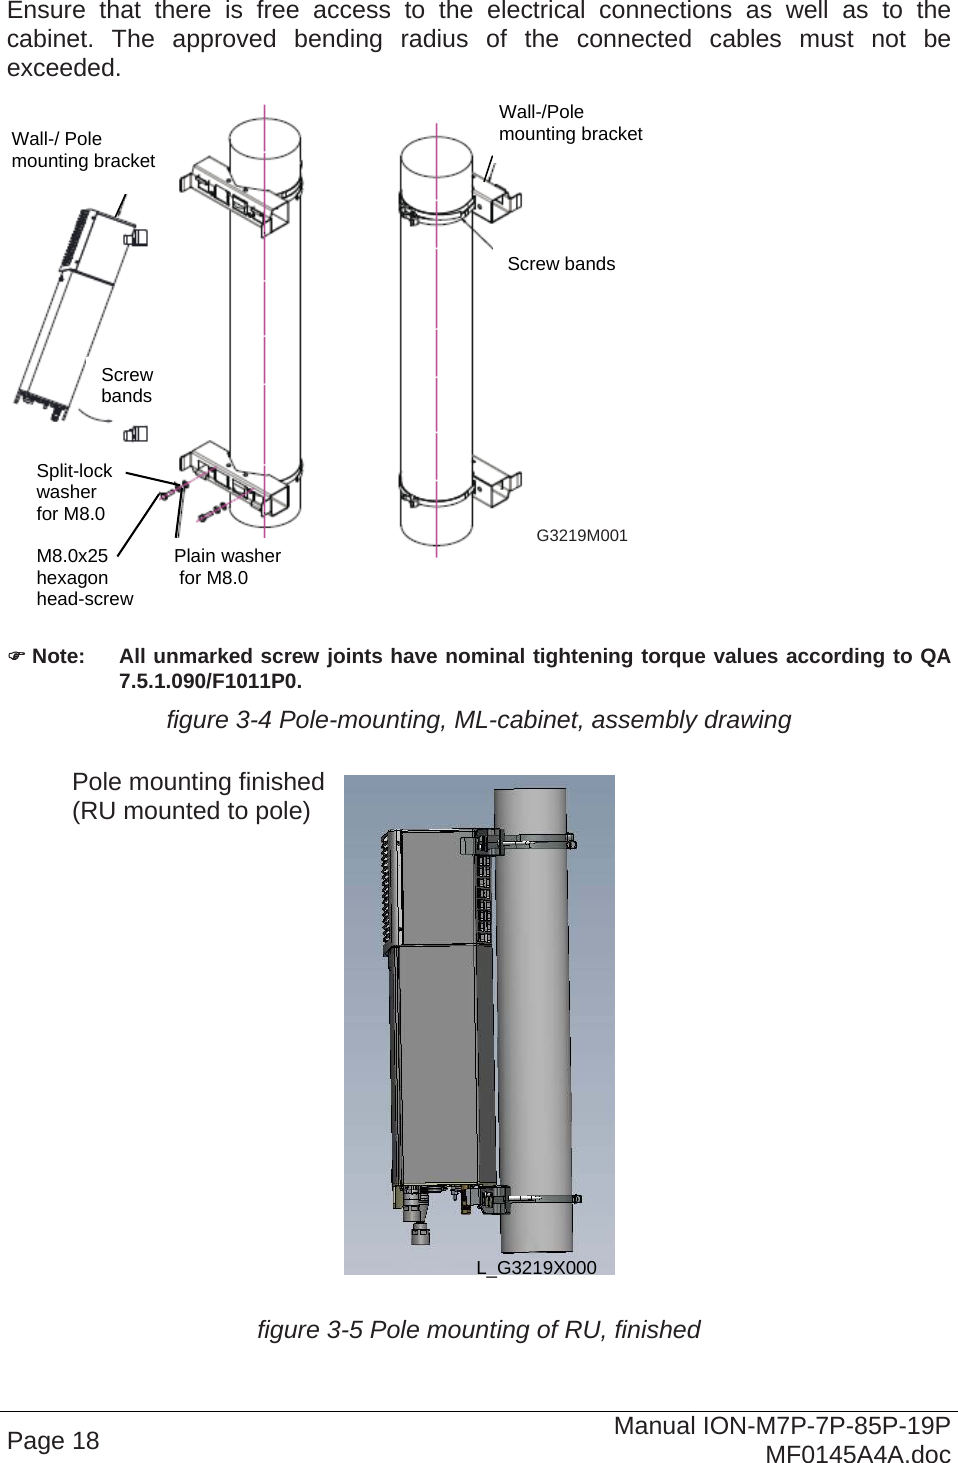   Ensure that there is free access to the electrical connections as well as to the cabinet. The approved bending radius of the connected cables must not be exceeded.  Wall-/Pole  Page 18  Manual ION-M7P-7P-85P-19P MF0145A4A.doc    Note:  All unmarked screw joints have nominal tightening torque values according to QA 7.5.1.090/F1011P0. figure 3-4 Pole-mounting, ML-cabinet, assembly drawing     figure 3-5 Pole mounting of RU, finished L_G3219X000 Pole mounting finished (RU mounted to pole) G3219M001 mounting bracket Screw bands Plain washer  for M8.0 Split-lock washer  for M8.0 M8.0x25 Wall-/ Pole  mounting bracket Screw  bands   hexagon  head-screw 